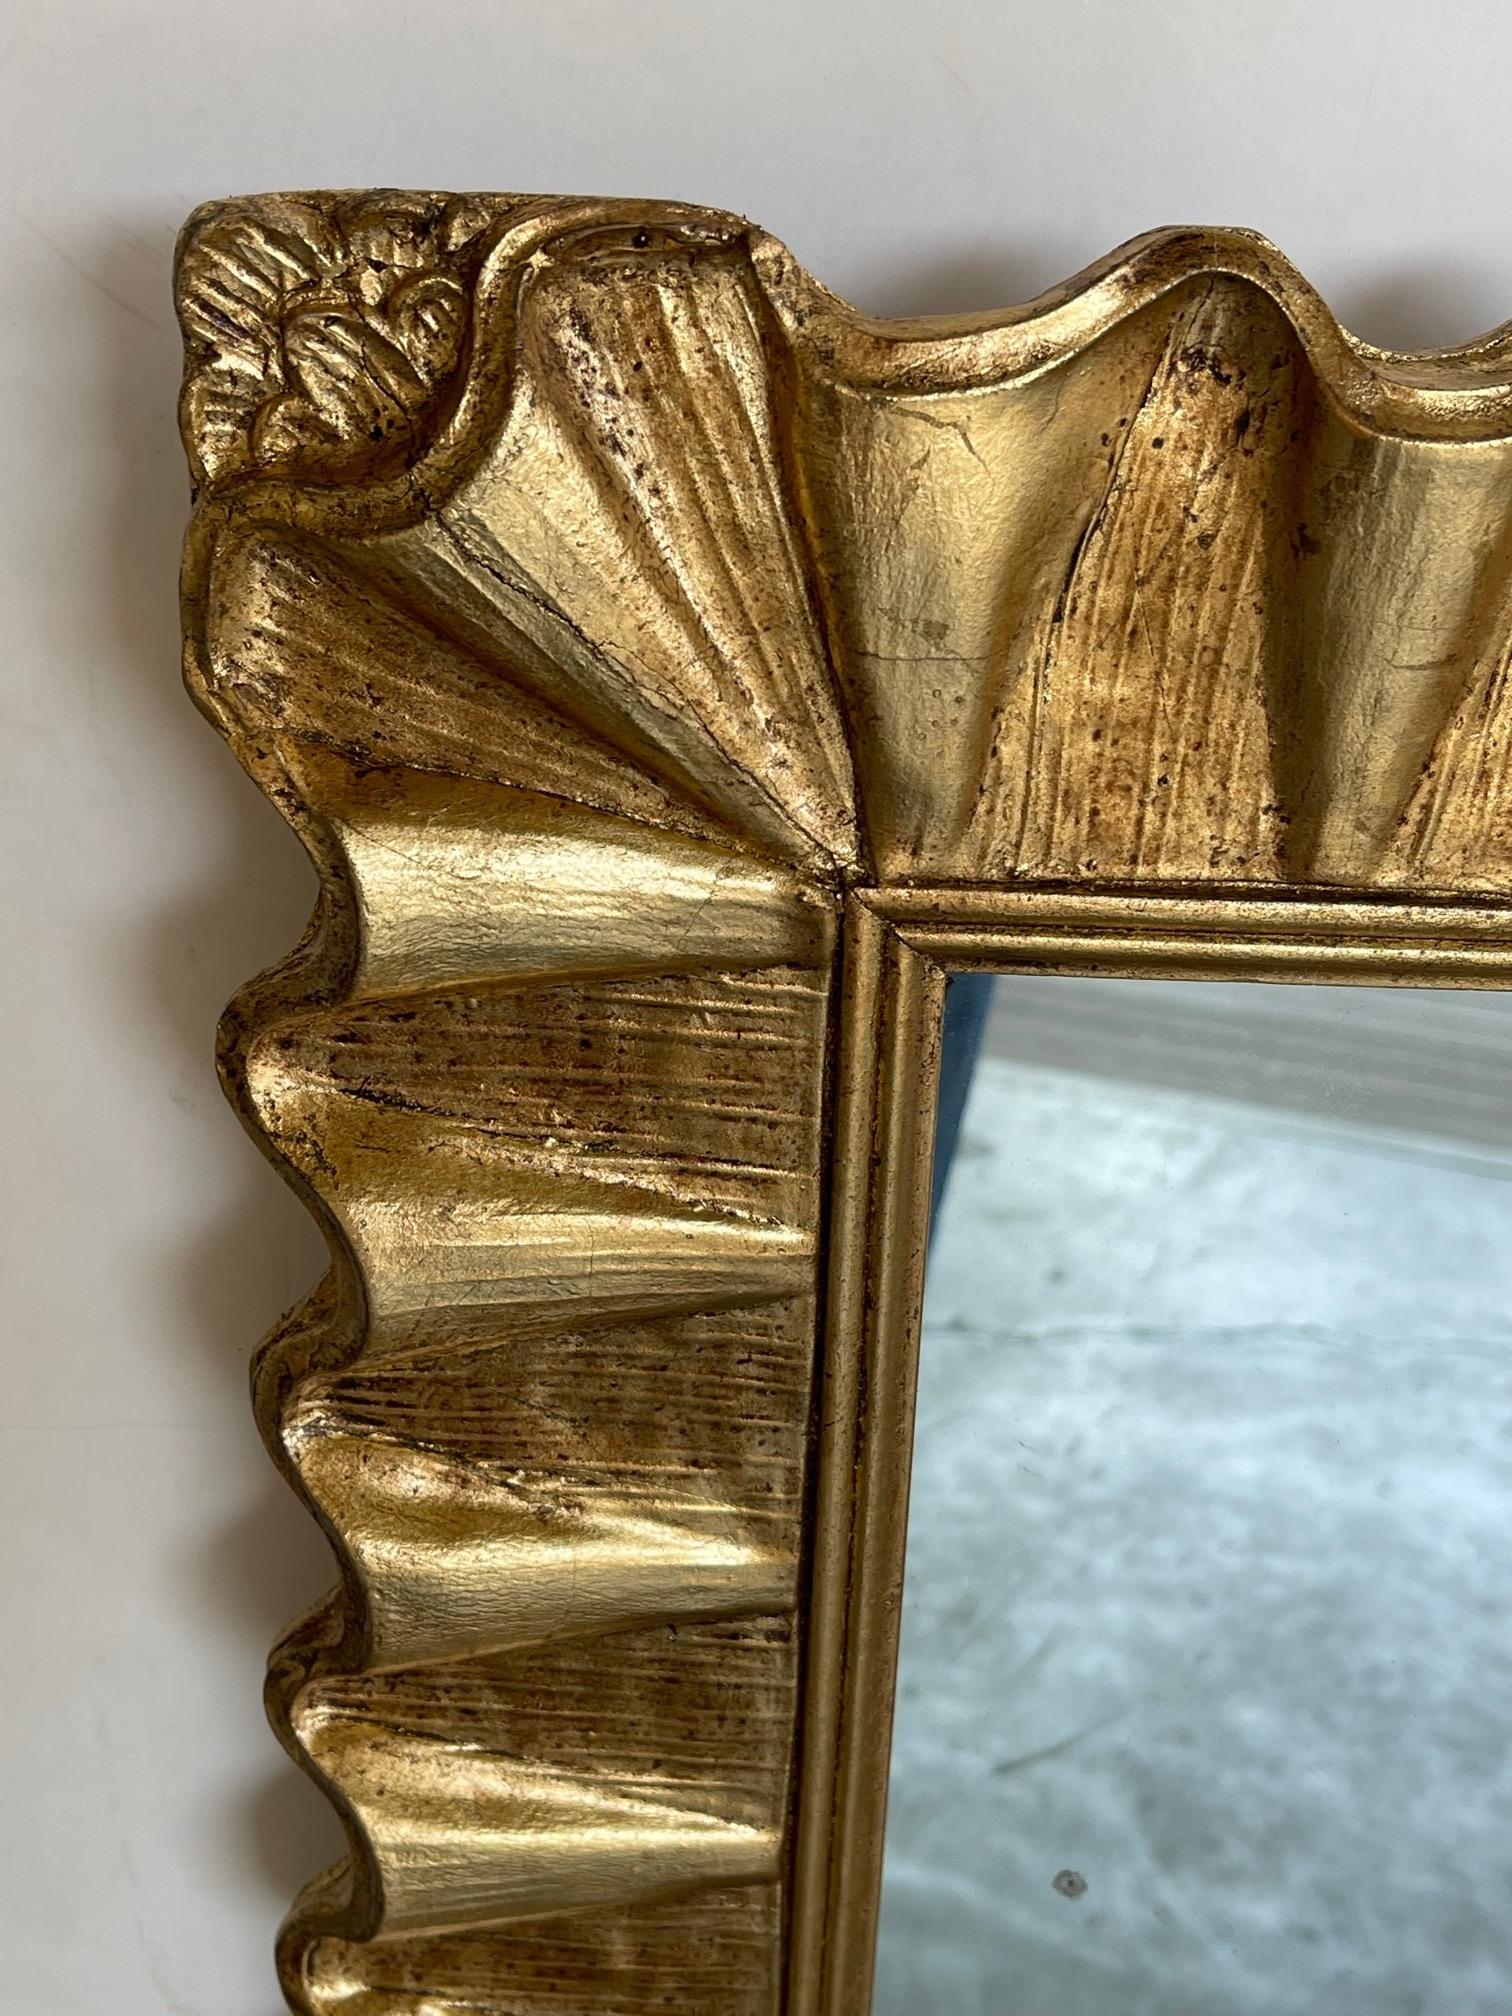 the rectangular mirror within an undulating gilt frame giving the appearance of small folds; can also be hung horizontally